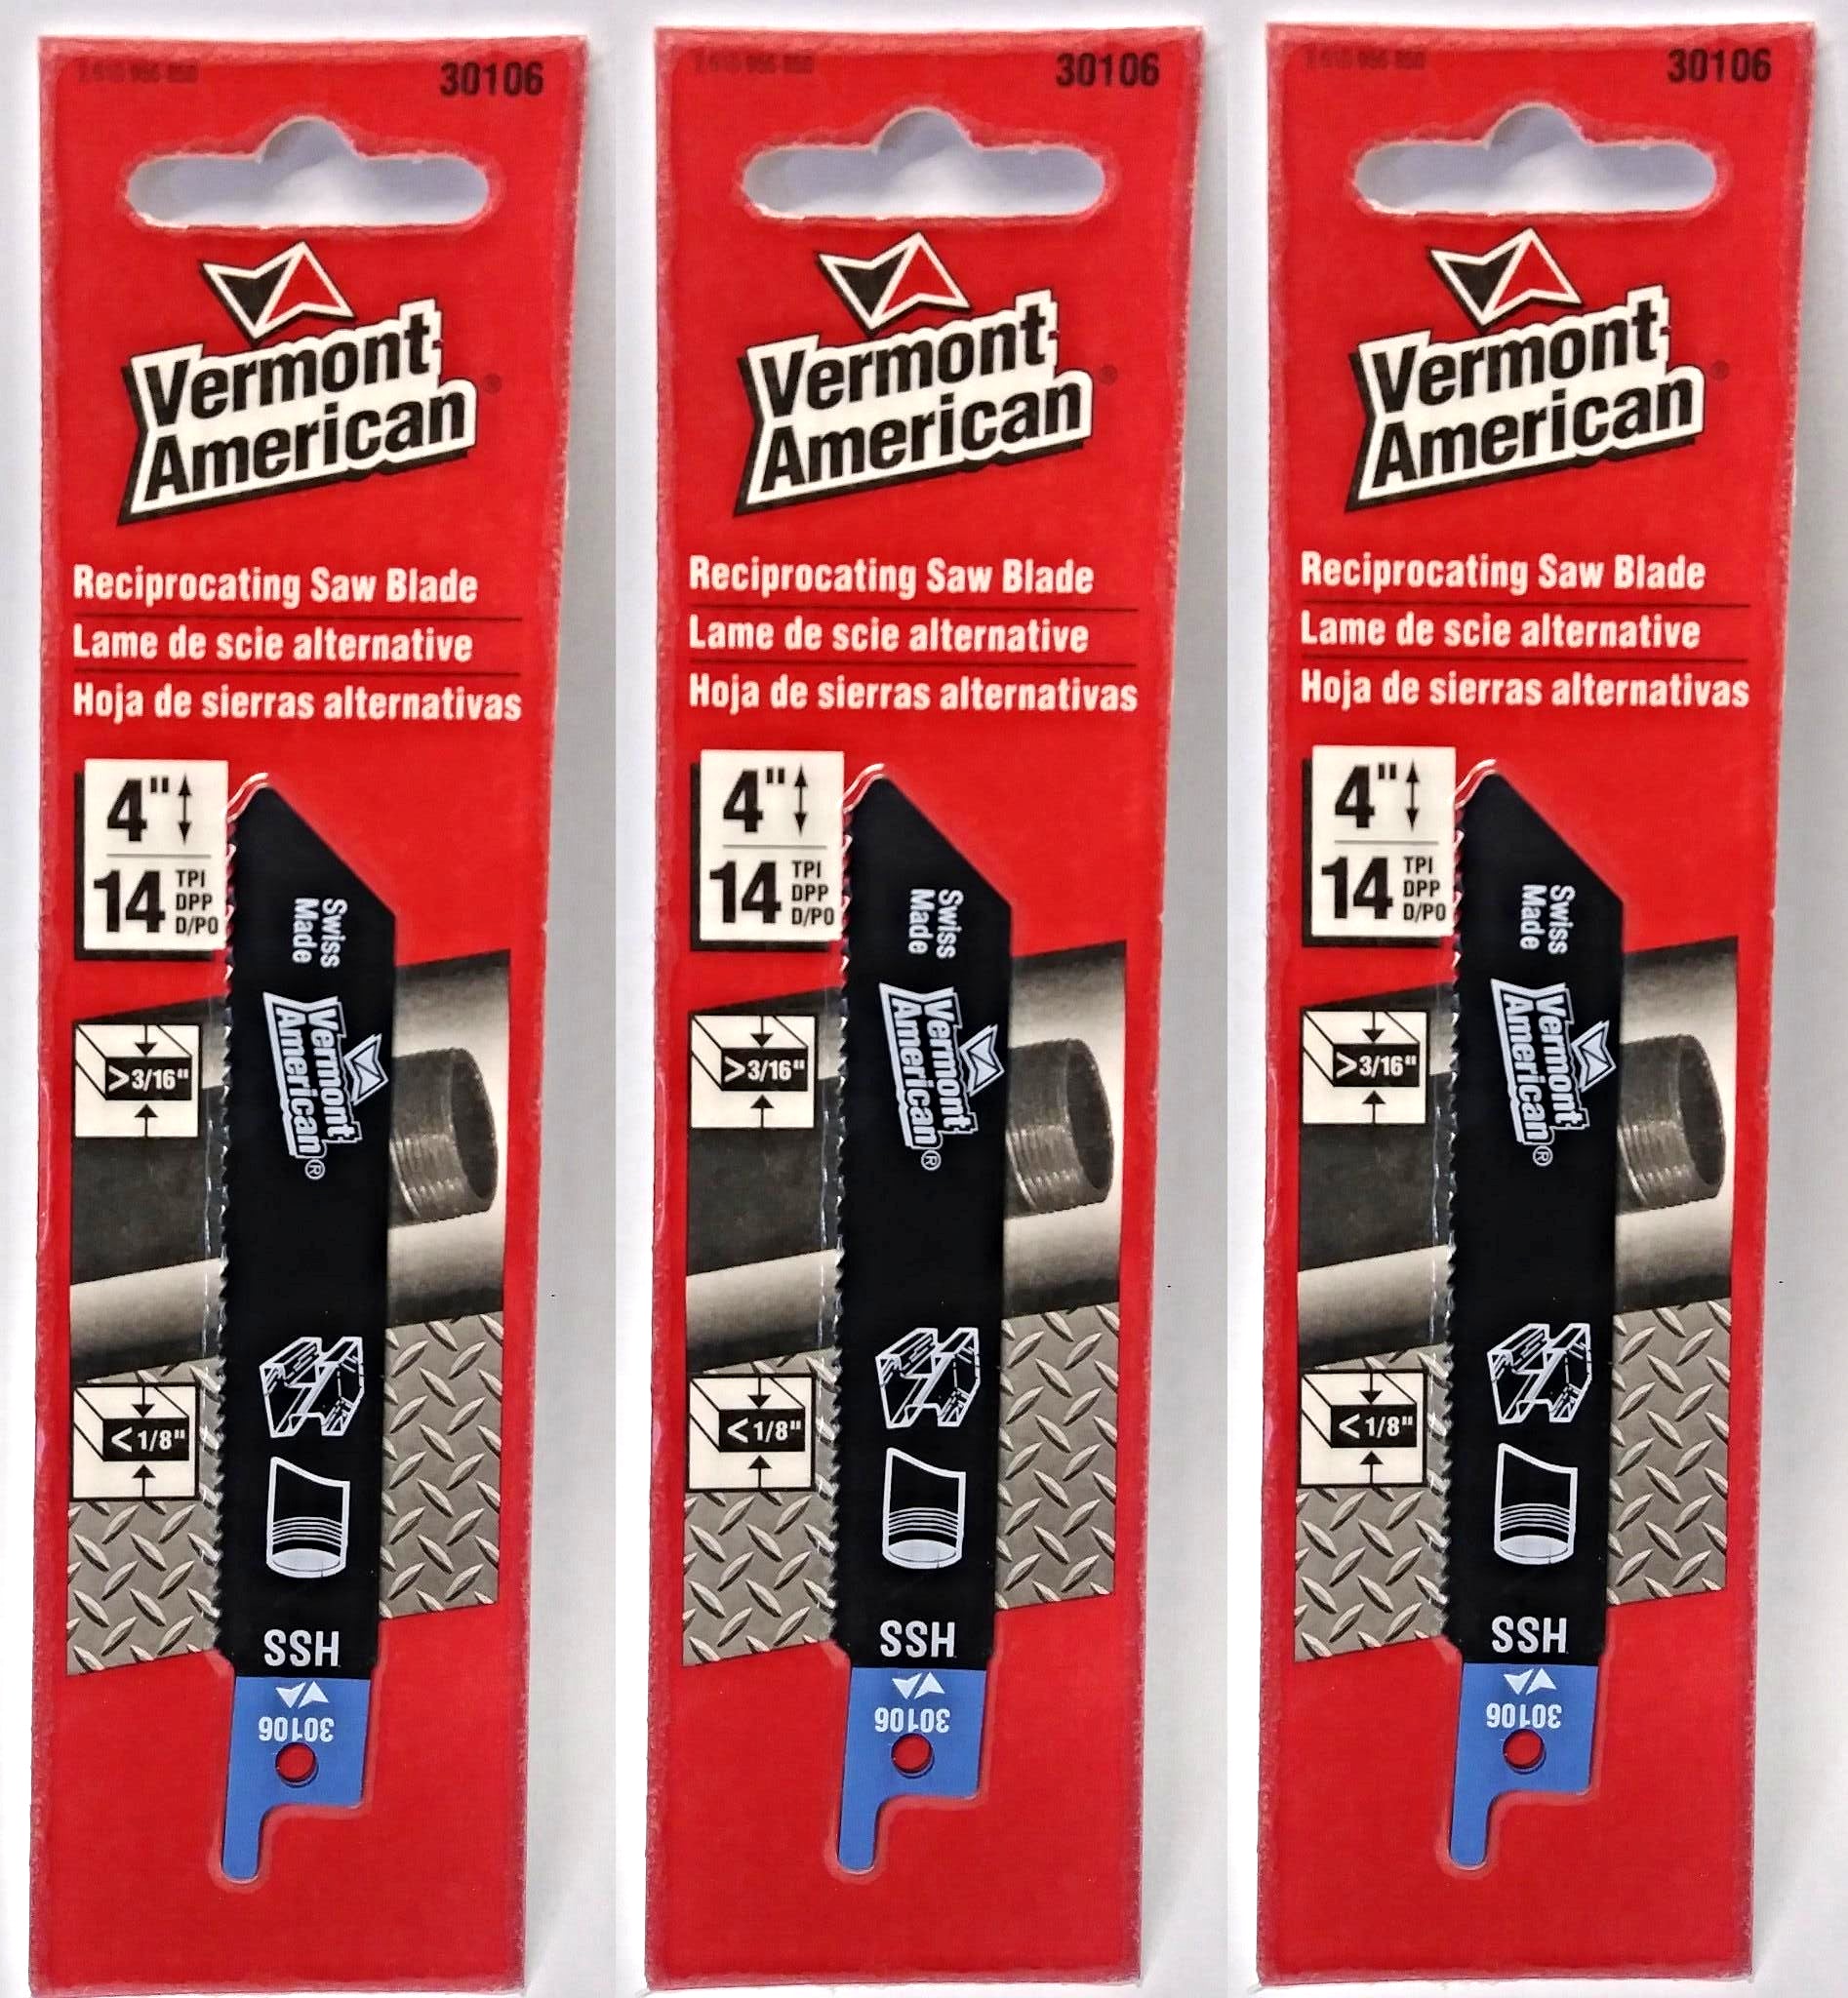 Vermont American 30106 4" x 14 TPI HSS Reciprocating Saw Blade (3 Packs)